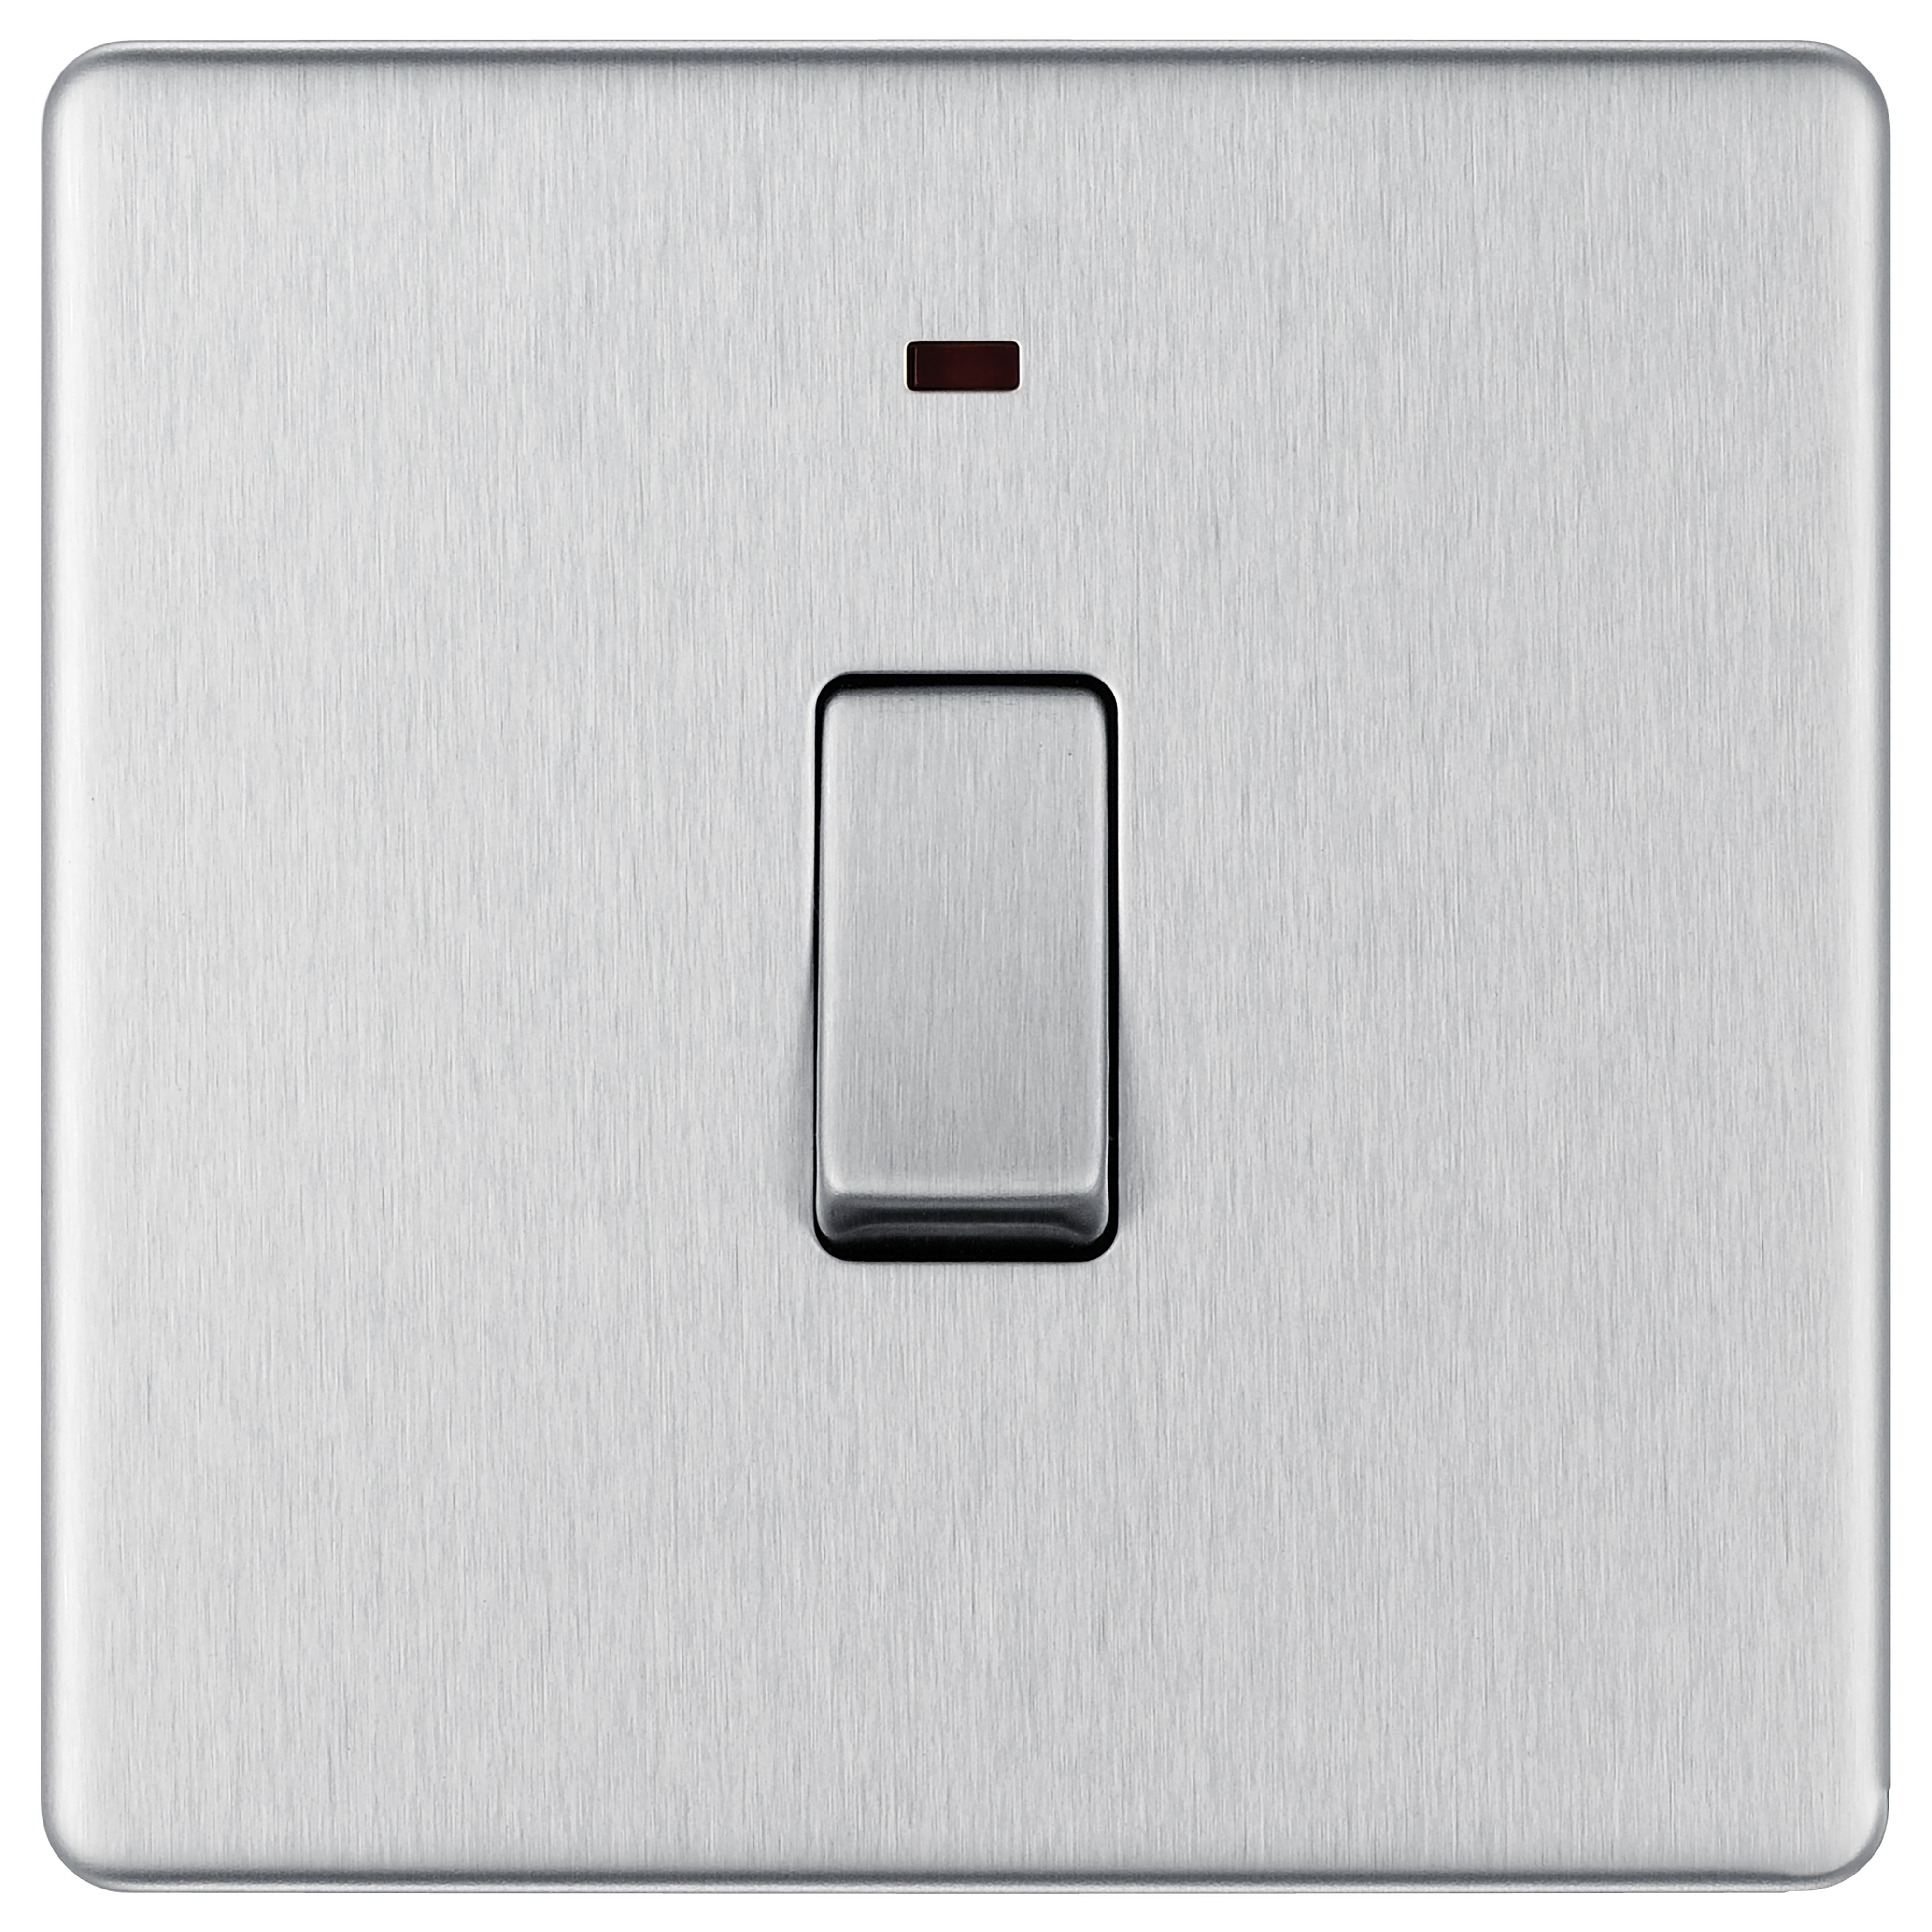 BG Screwless Flatplate Brushed Steel Single Switch 20A With Power Indicator